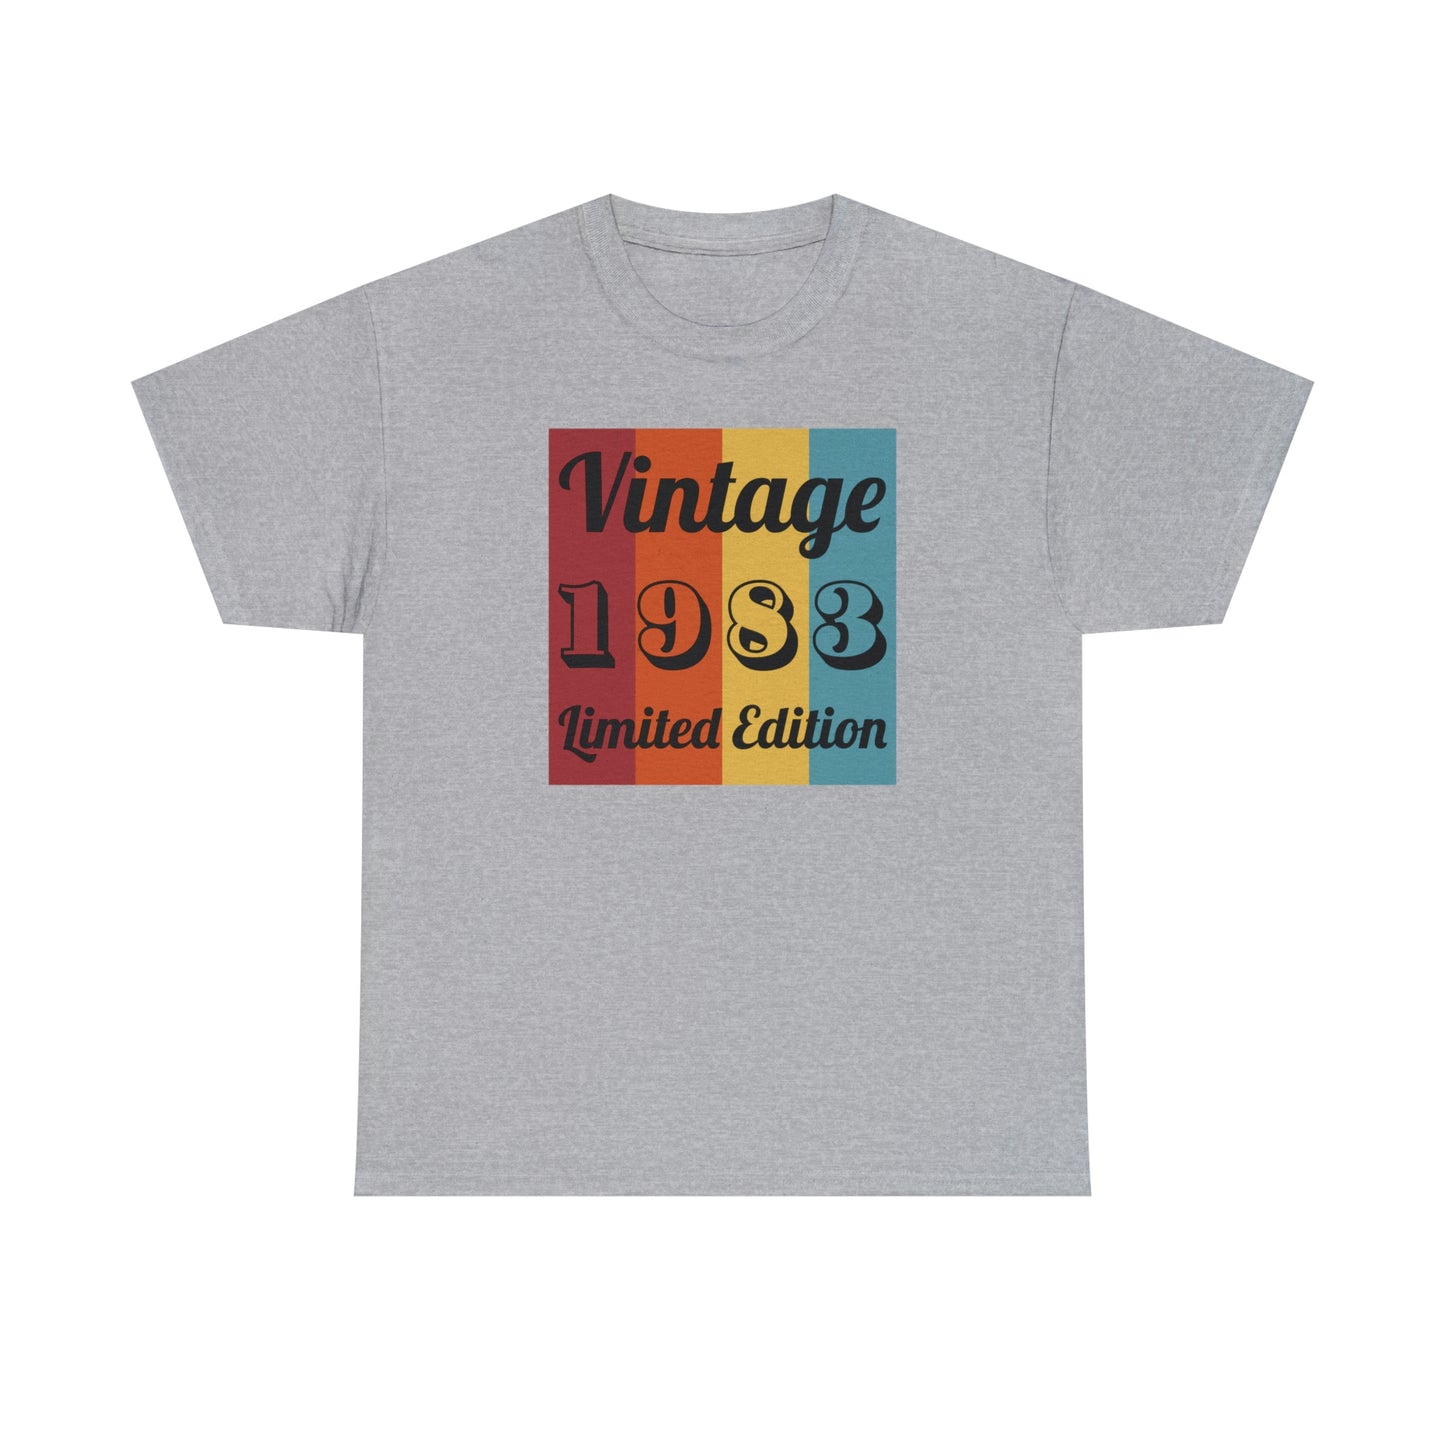 1983 T-Shirt For Vintage Limited Edition TShirt For Class Reunion Shirt For Birthday T Shirt For Birth Year Shirt For Graduation Year Shirt